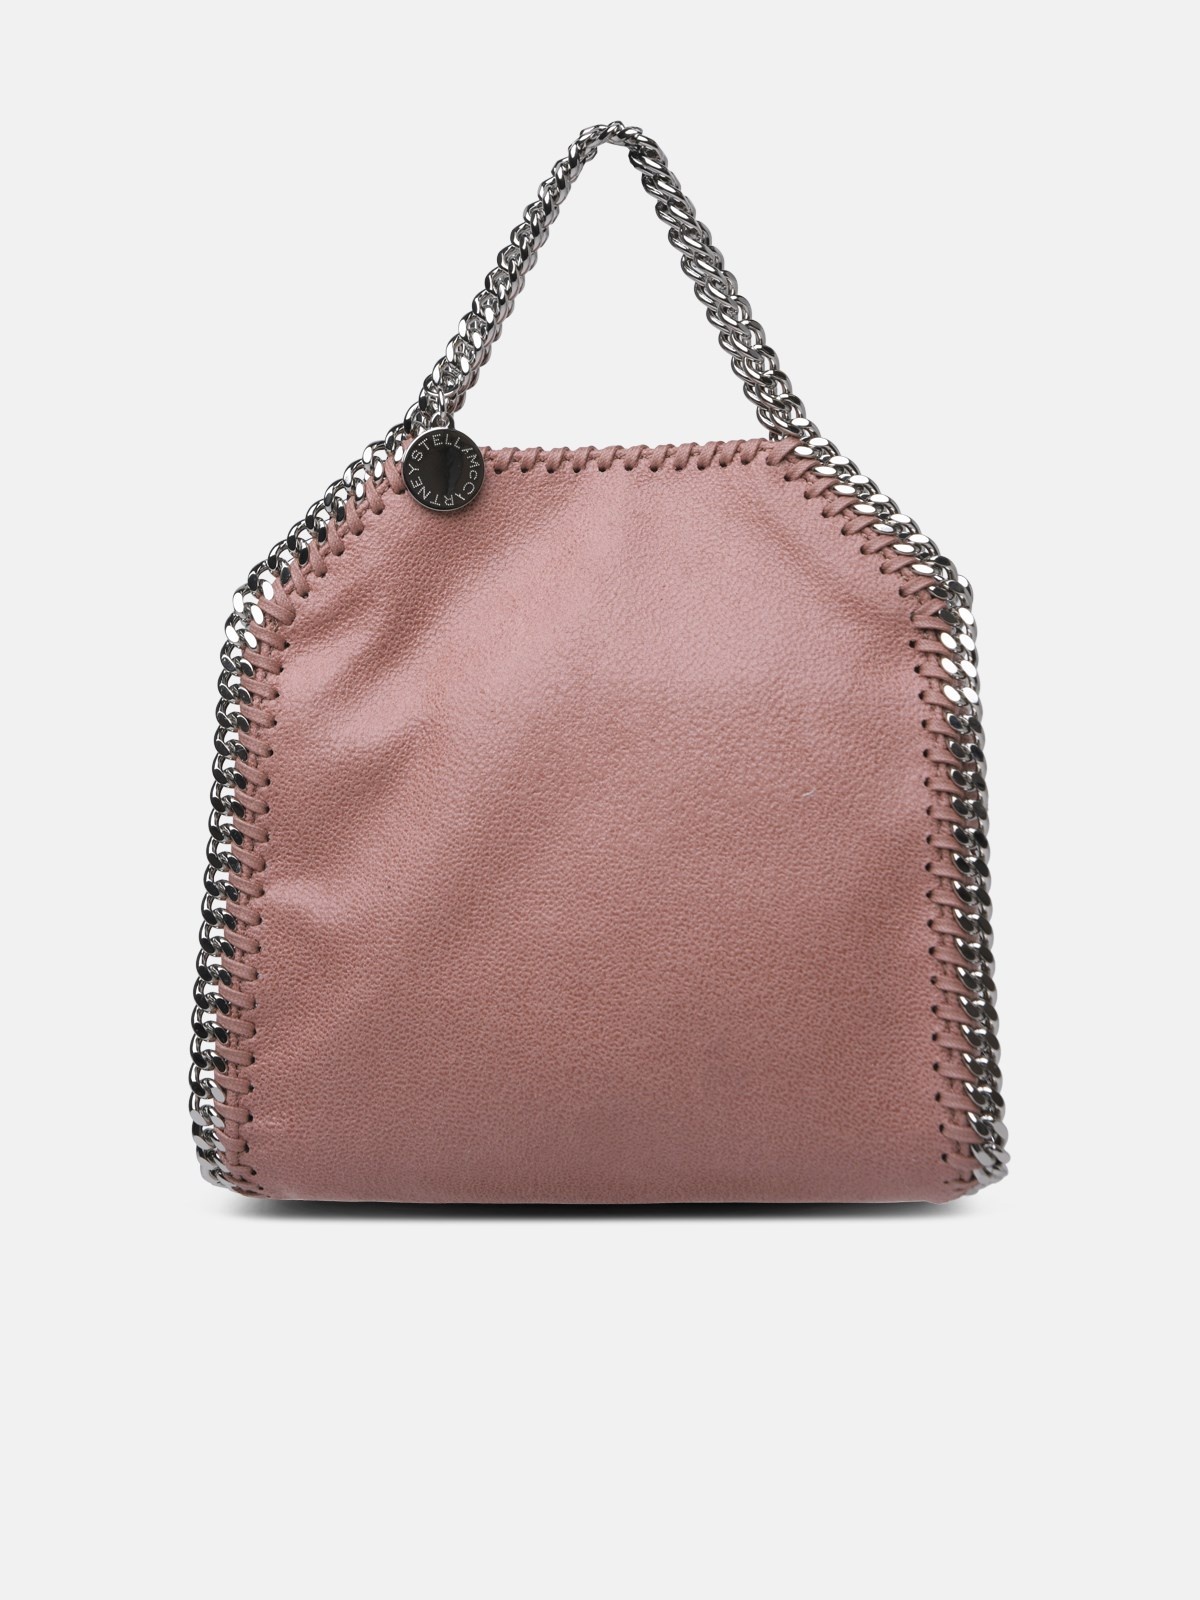 TINY 'FALABELLA' TOTE BAG IN PINK RECYCLED POLYESTER BLEND - 1